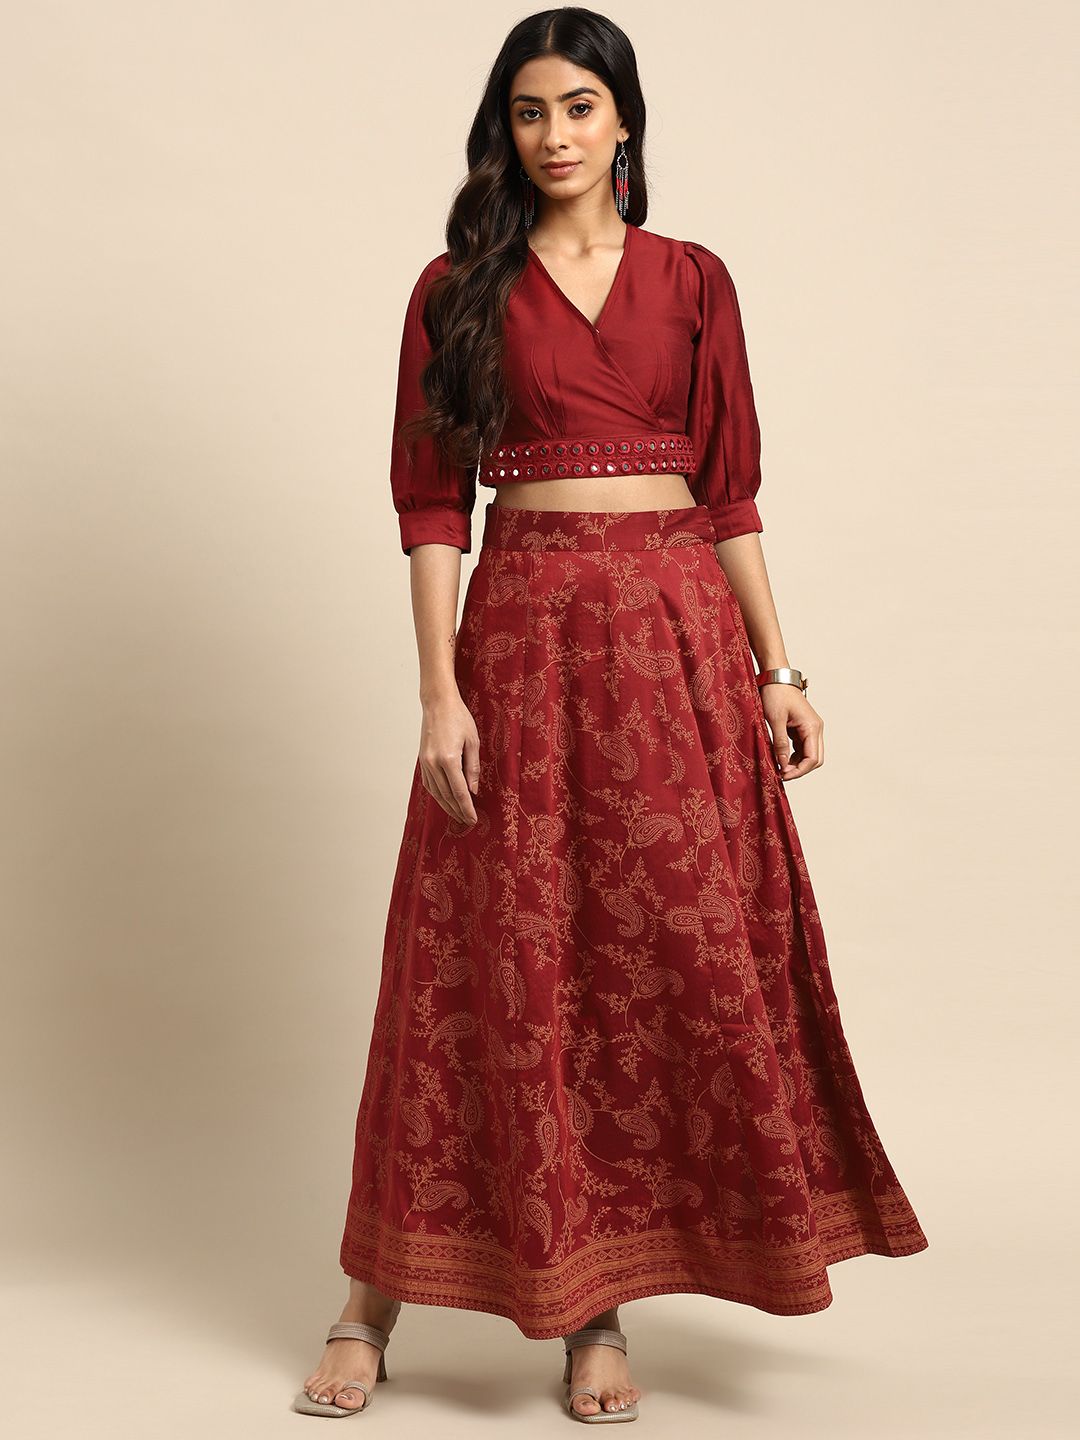 all about you Mirror-Work Ready to Wear Fusion Lehenga Choli Price in India